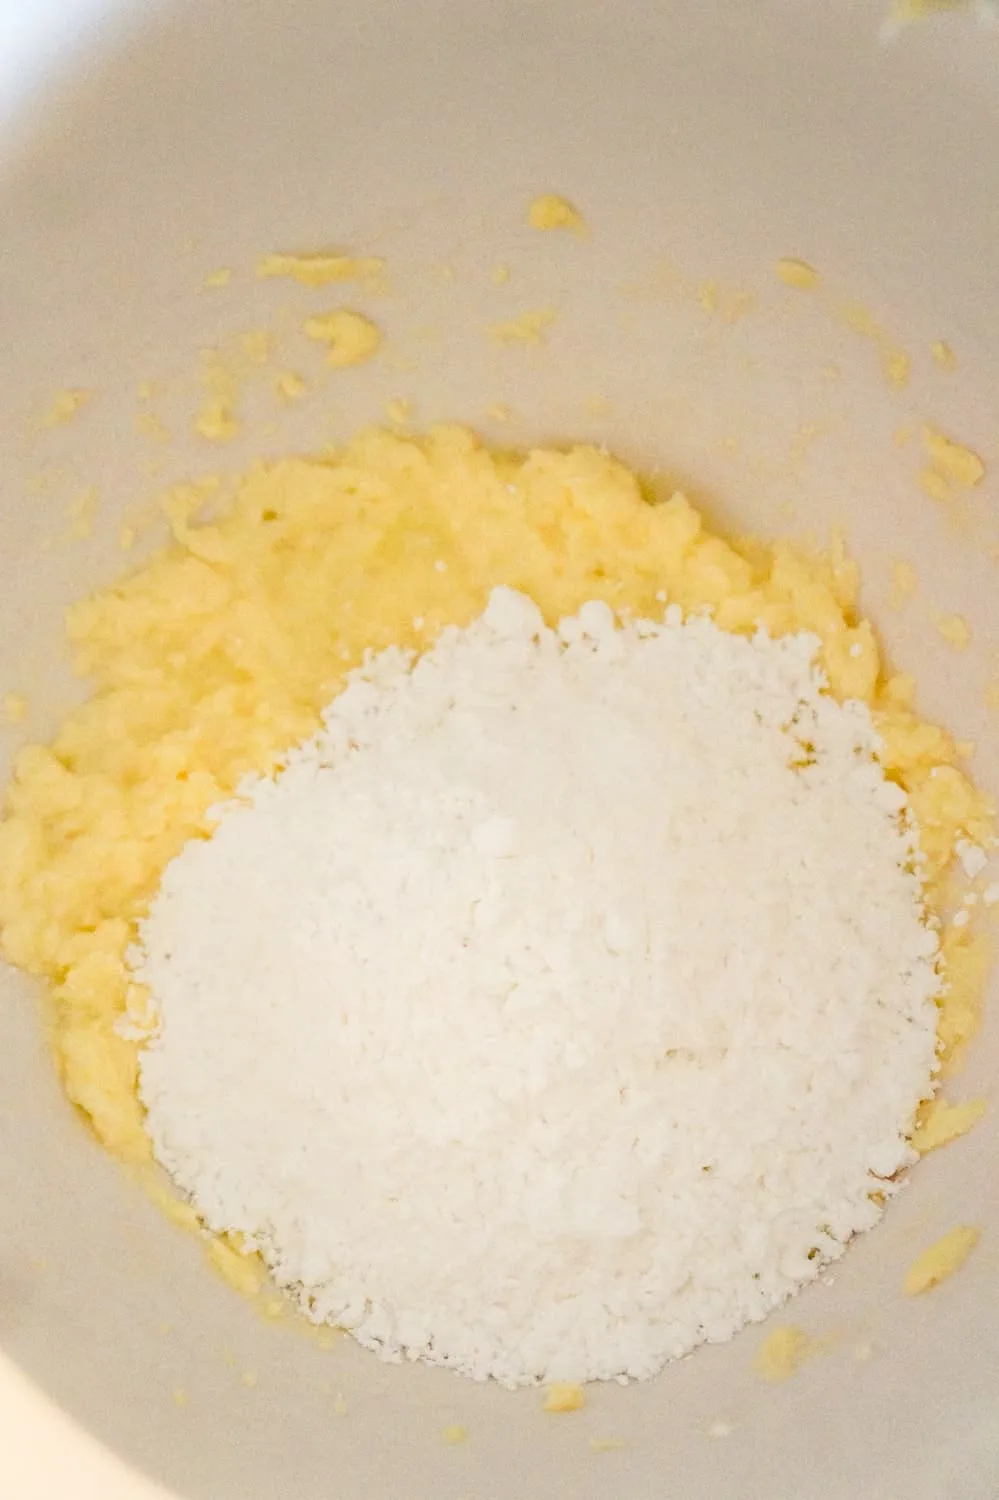 icing sugar on top of butter and egg white mixture